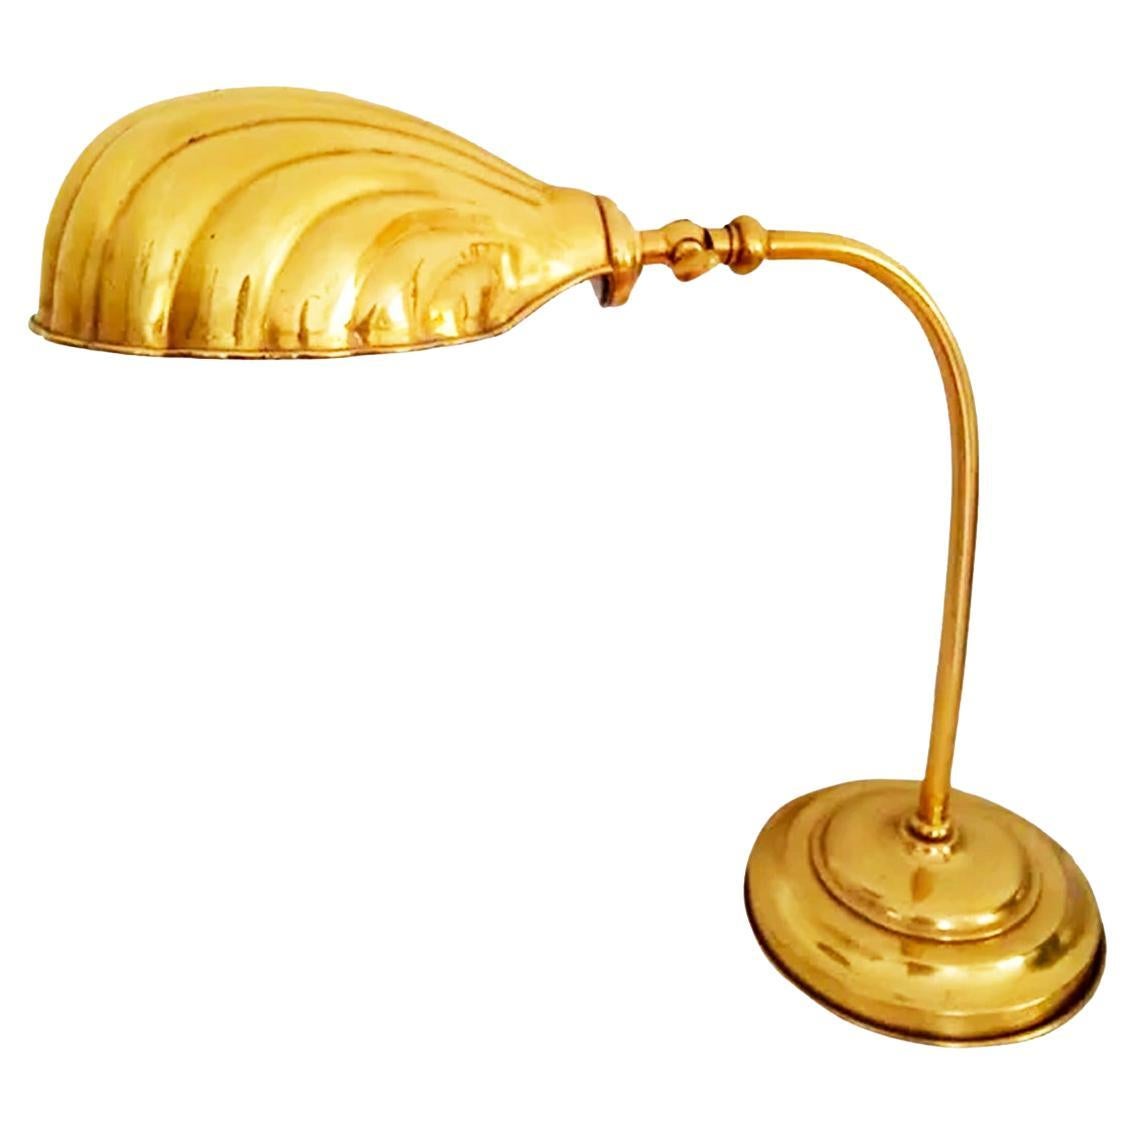 Desk shell Flexo lamp, 20th century Art Nouveau, Art Deco. Table lamp

Antique brass gooseneck lamp, early or mid 20th century

Perfect condition,, working

It is beautiful with its shell that can be rotated.

Very beautiful and unique and perfectly